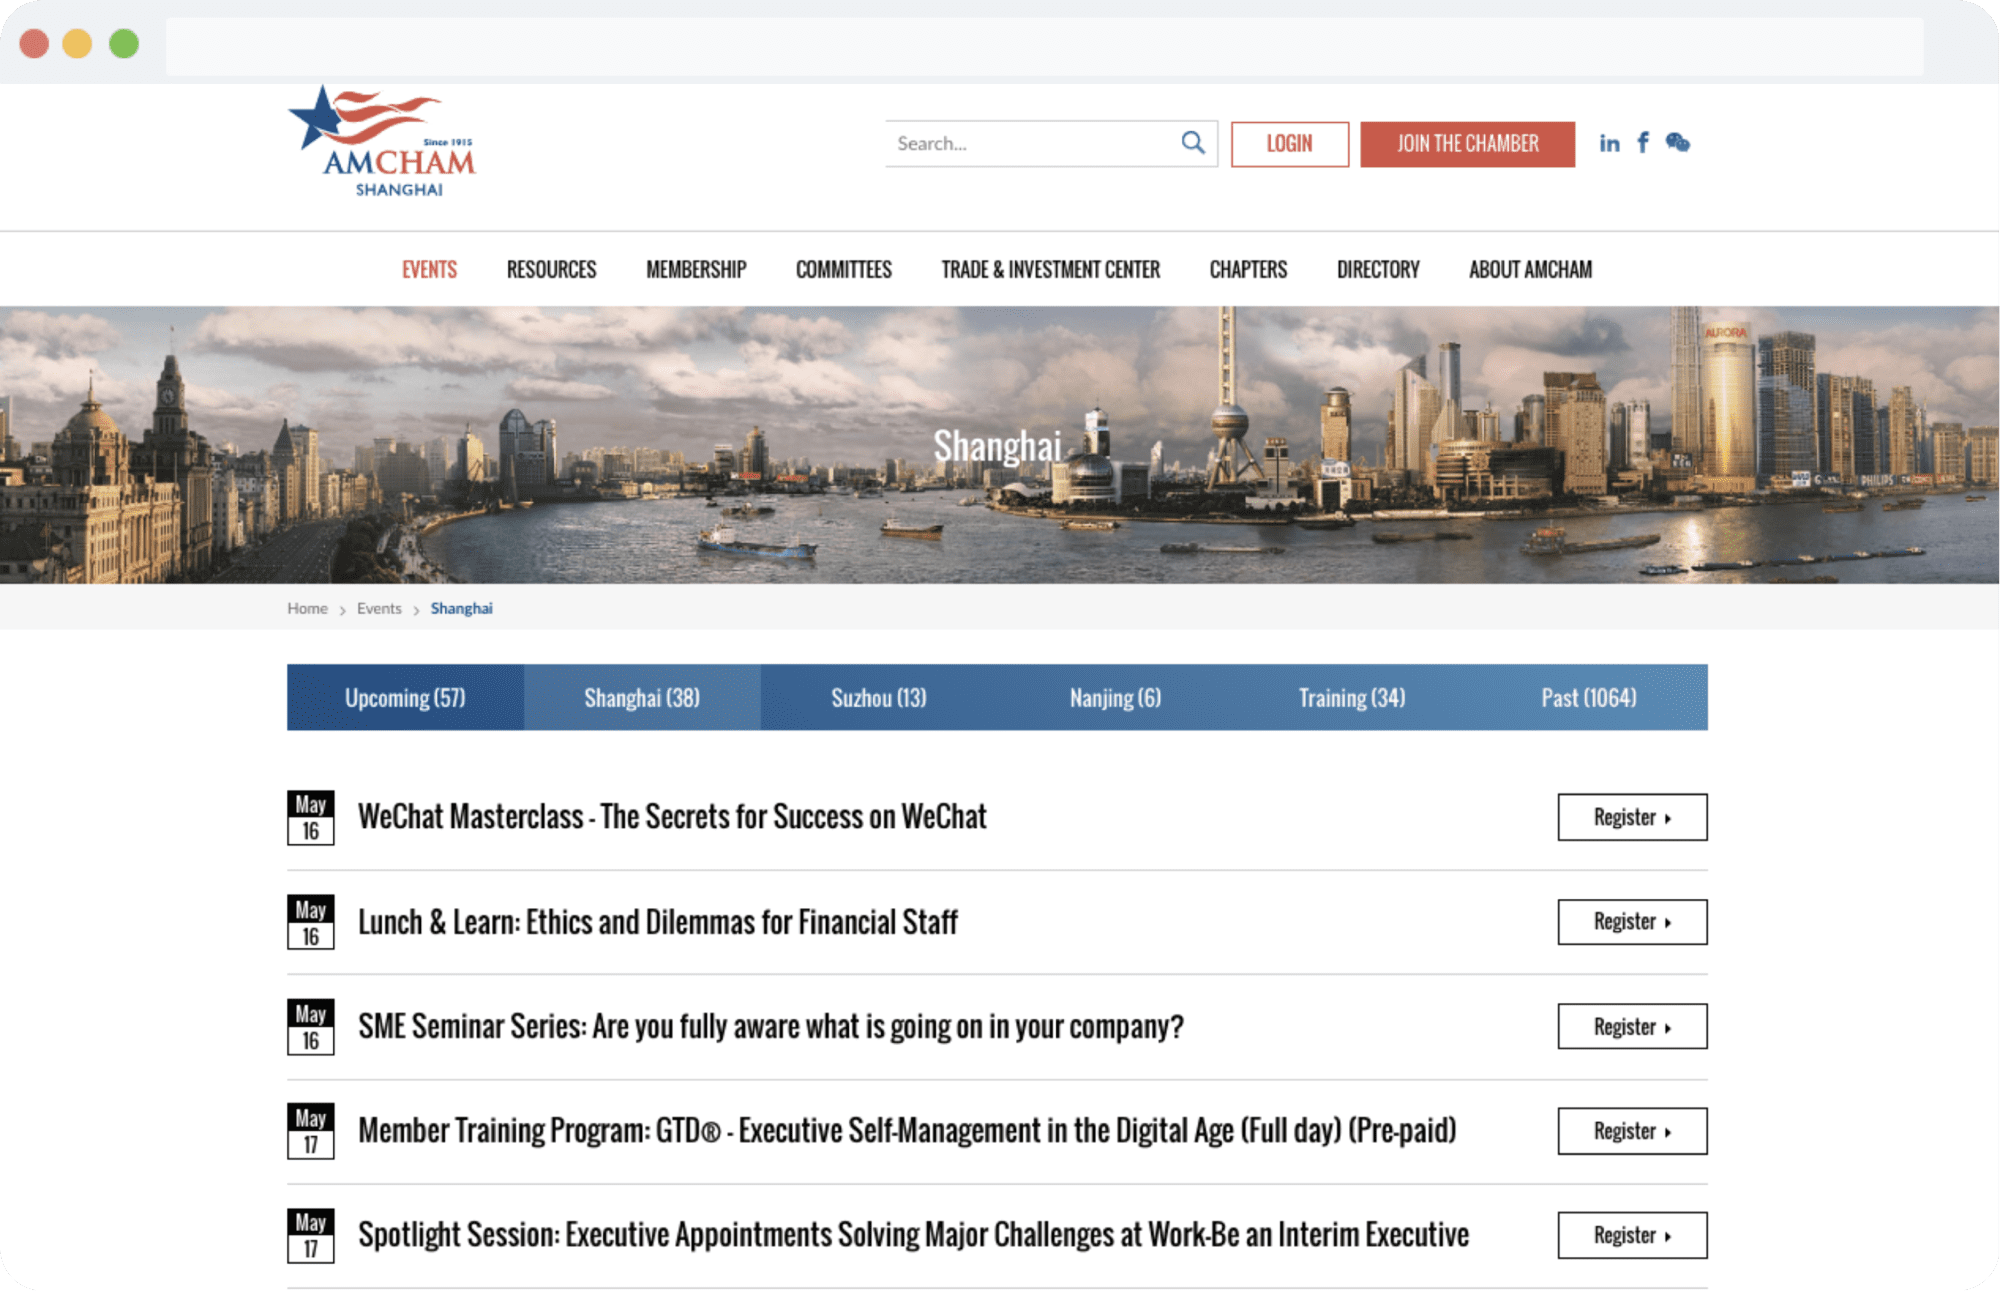 The Events page on the AmCham website